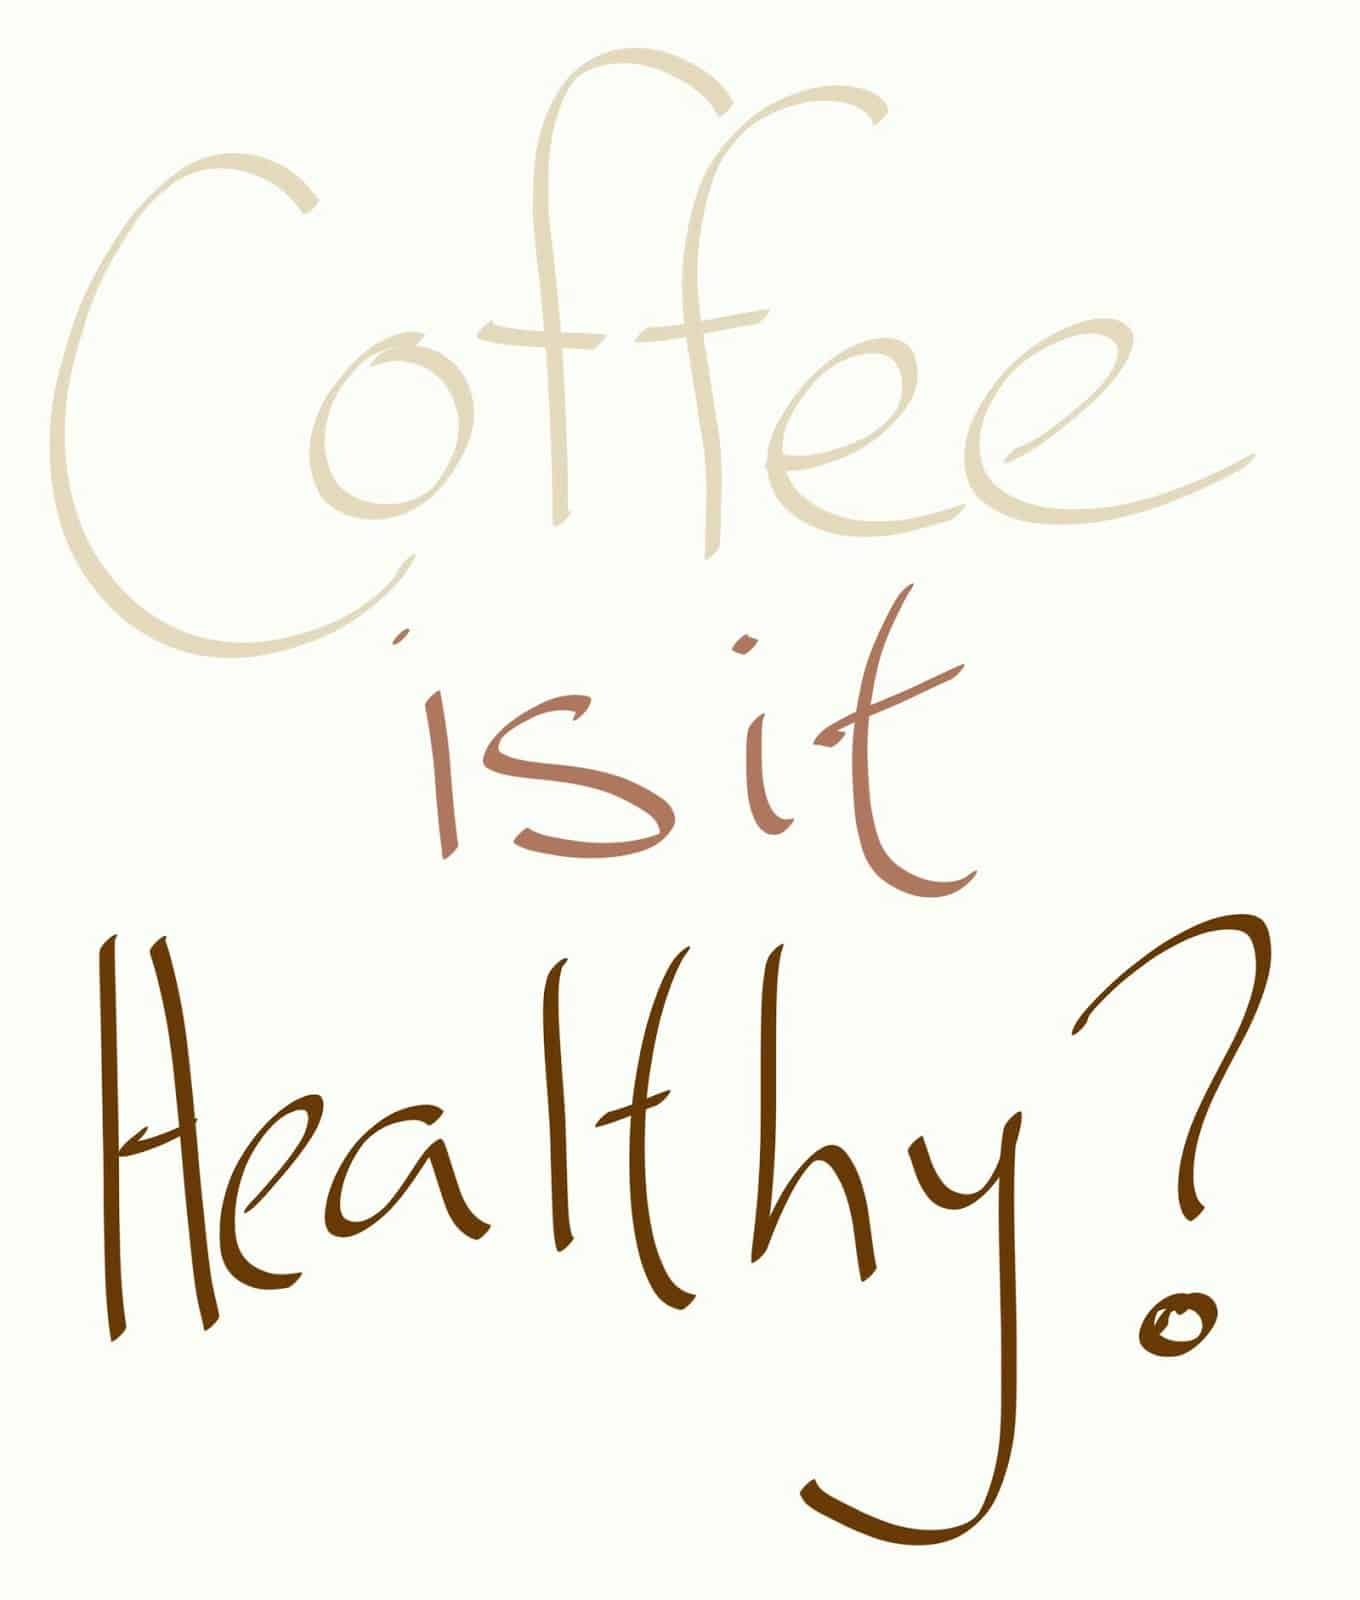 No me and no you: Is it healthy? Coffee